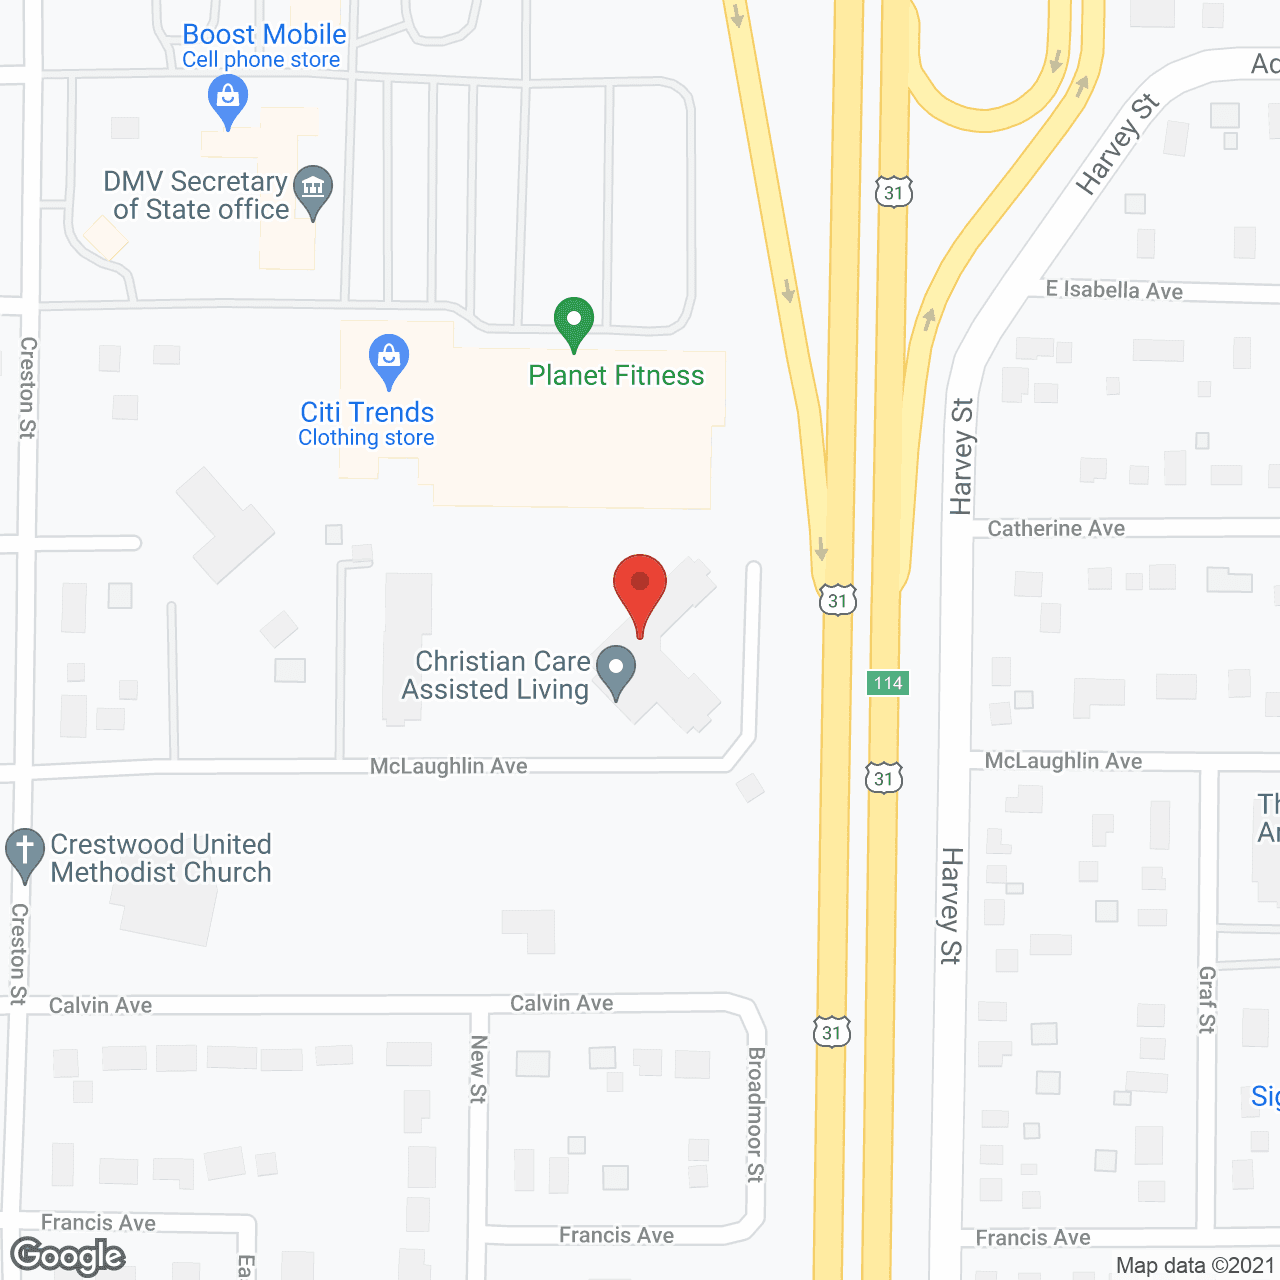 Christian Care Assisted Living in google map